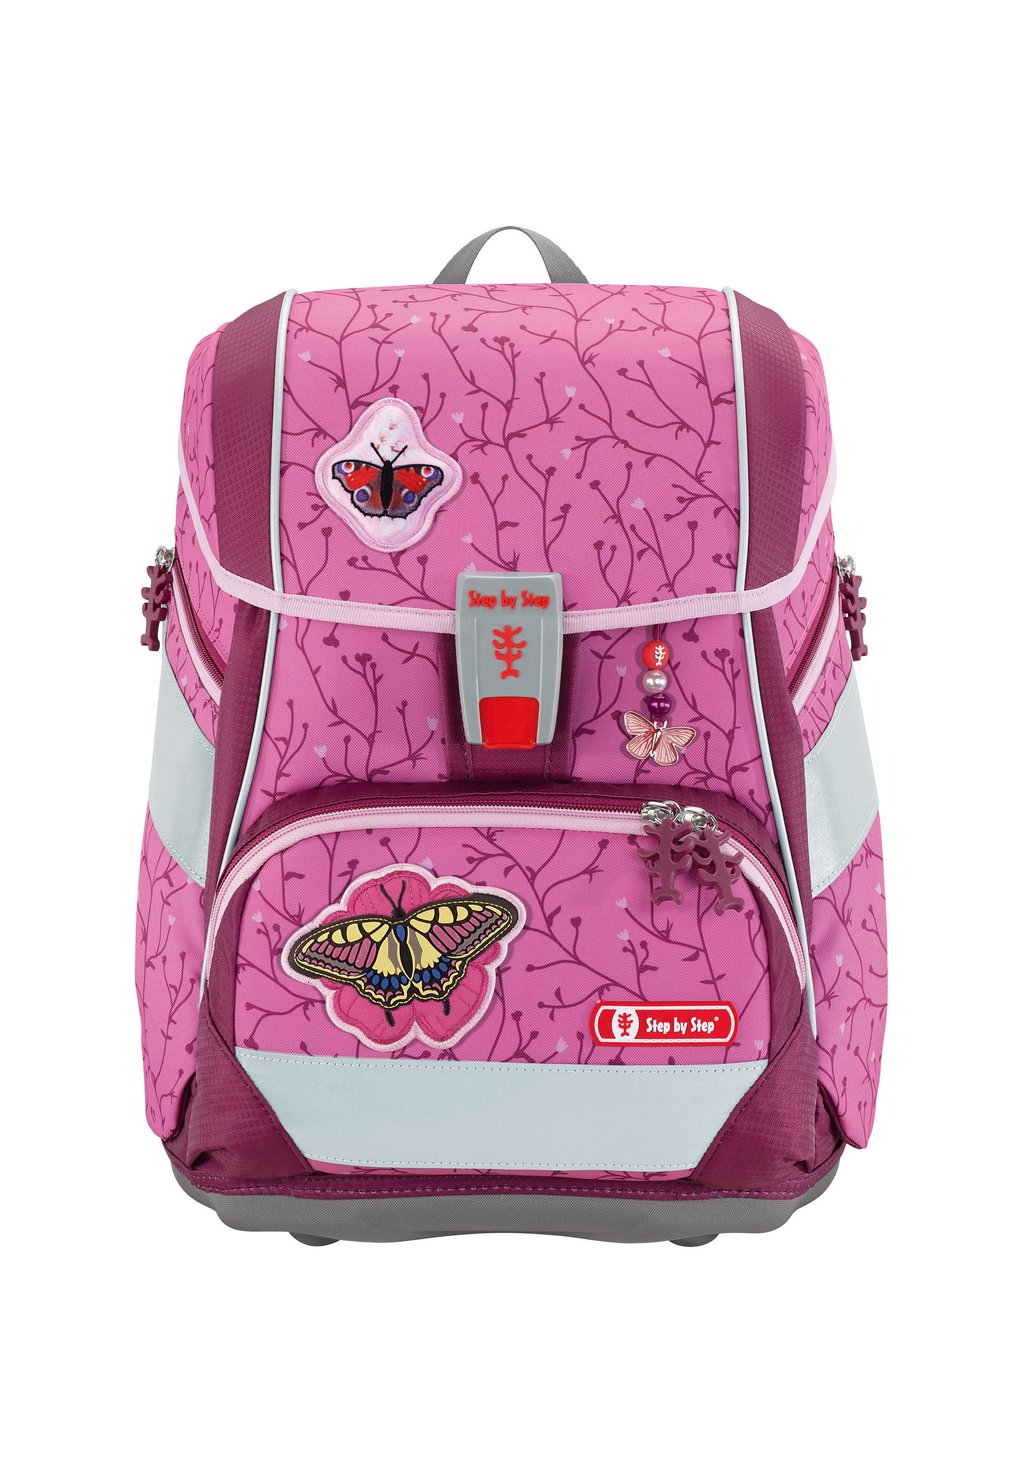 step by step ранец kid shiny butterfly с наполнением Набор школьных сумок 2IN1 PLUS SET 6TLG Step by Step, цвет natural butterfly